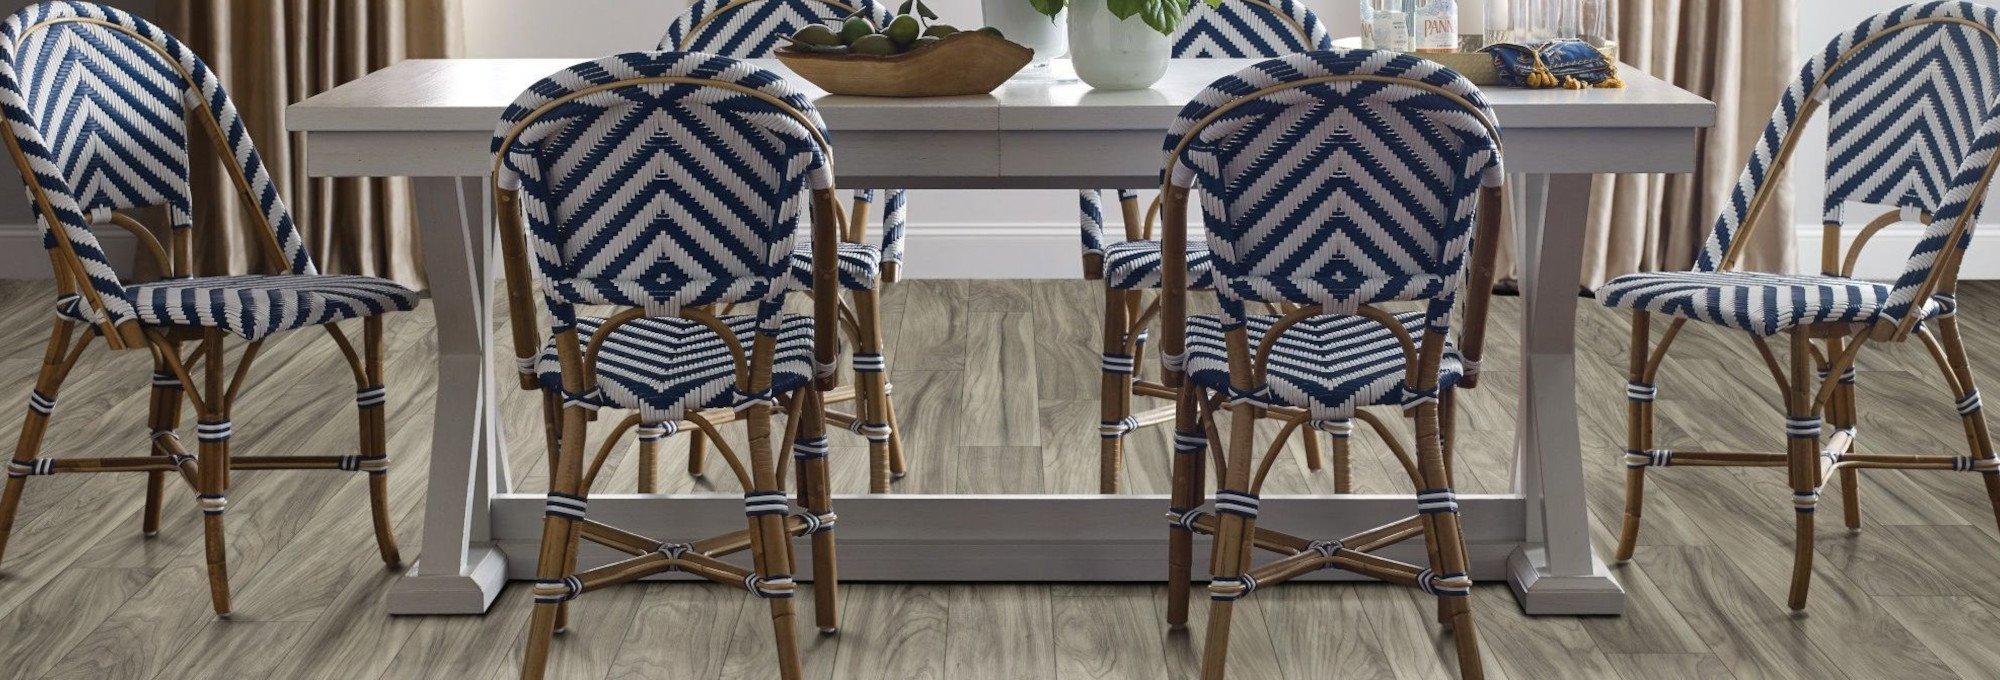 Chairs around a table on a laminate floor - Floors2Interiors in TX